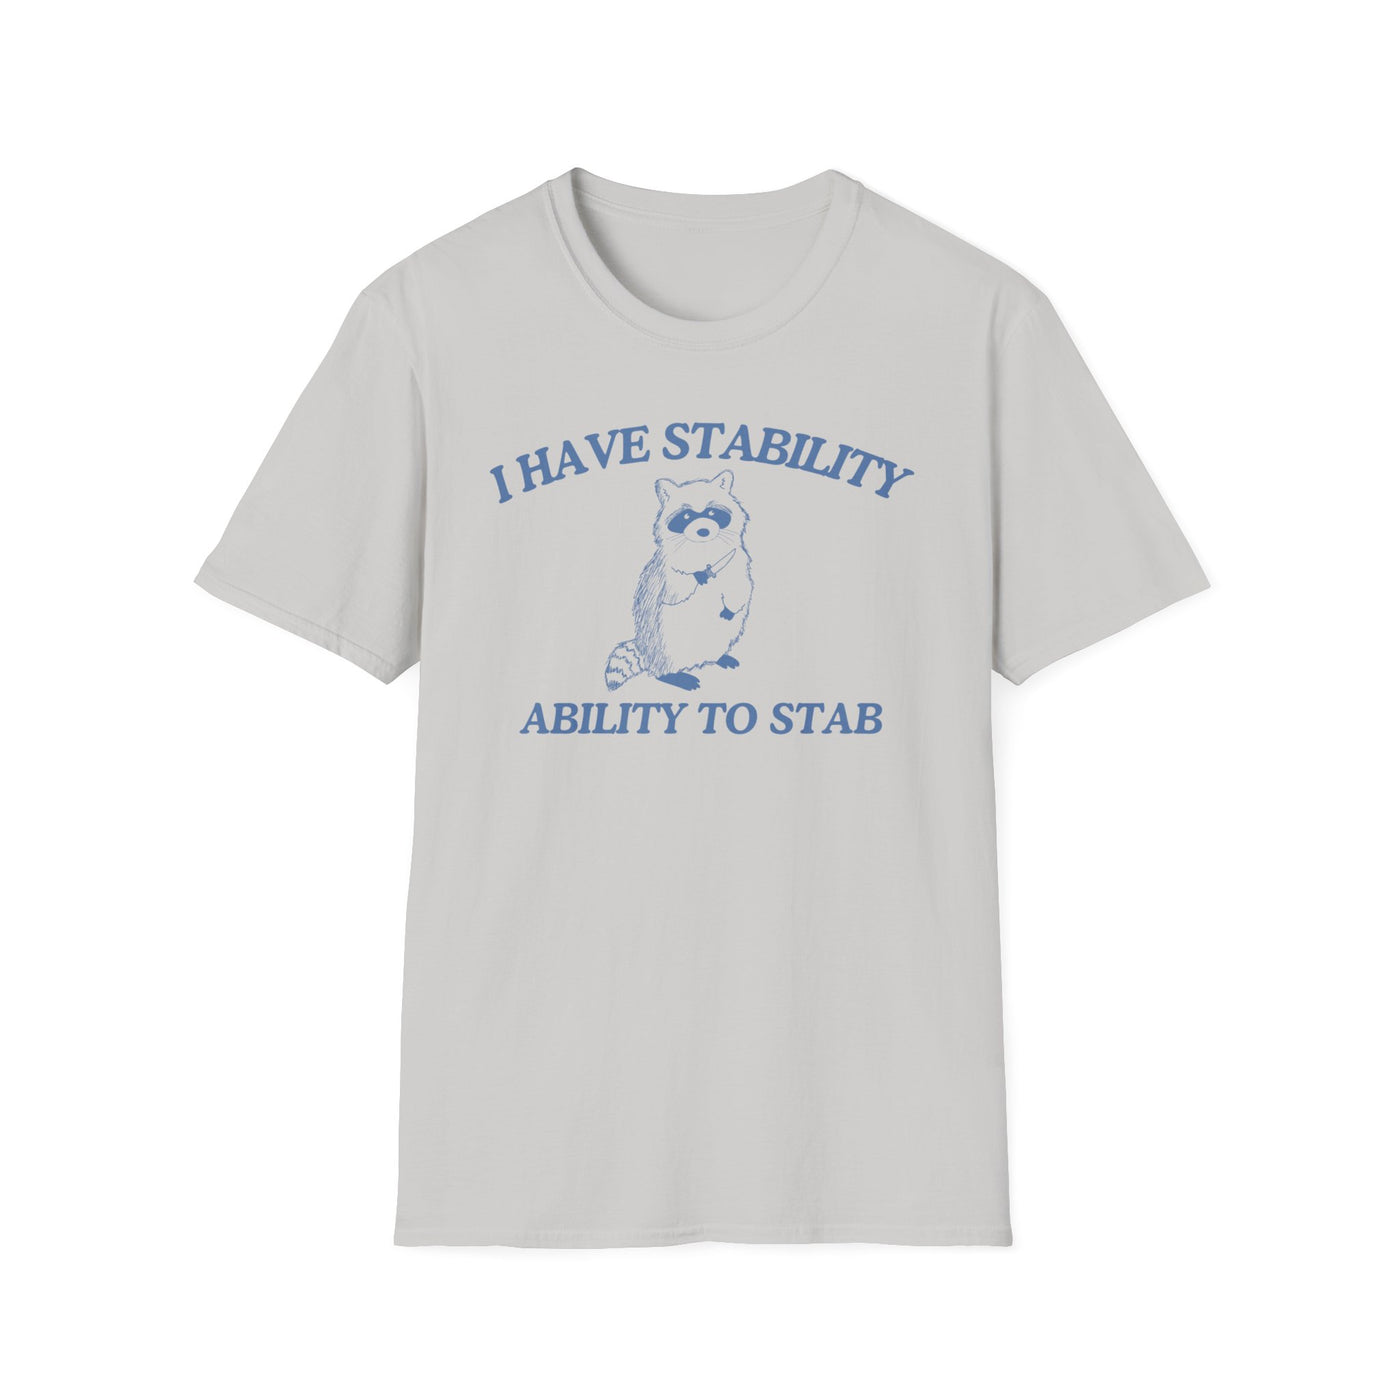 I Have Stability Ability To Stab